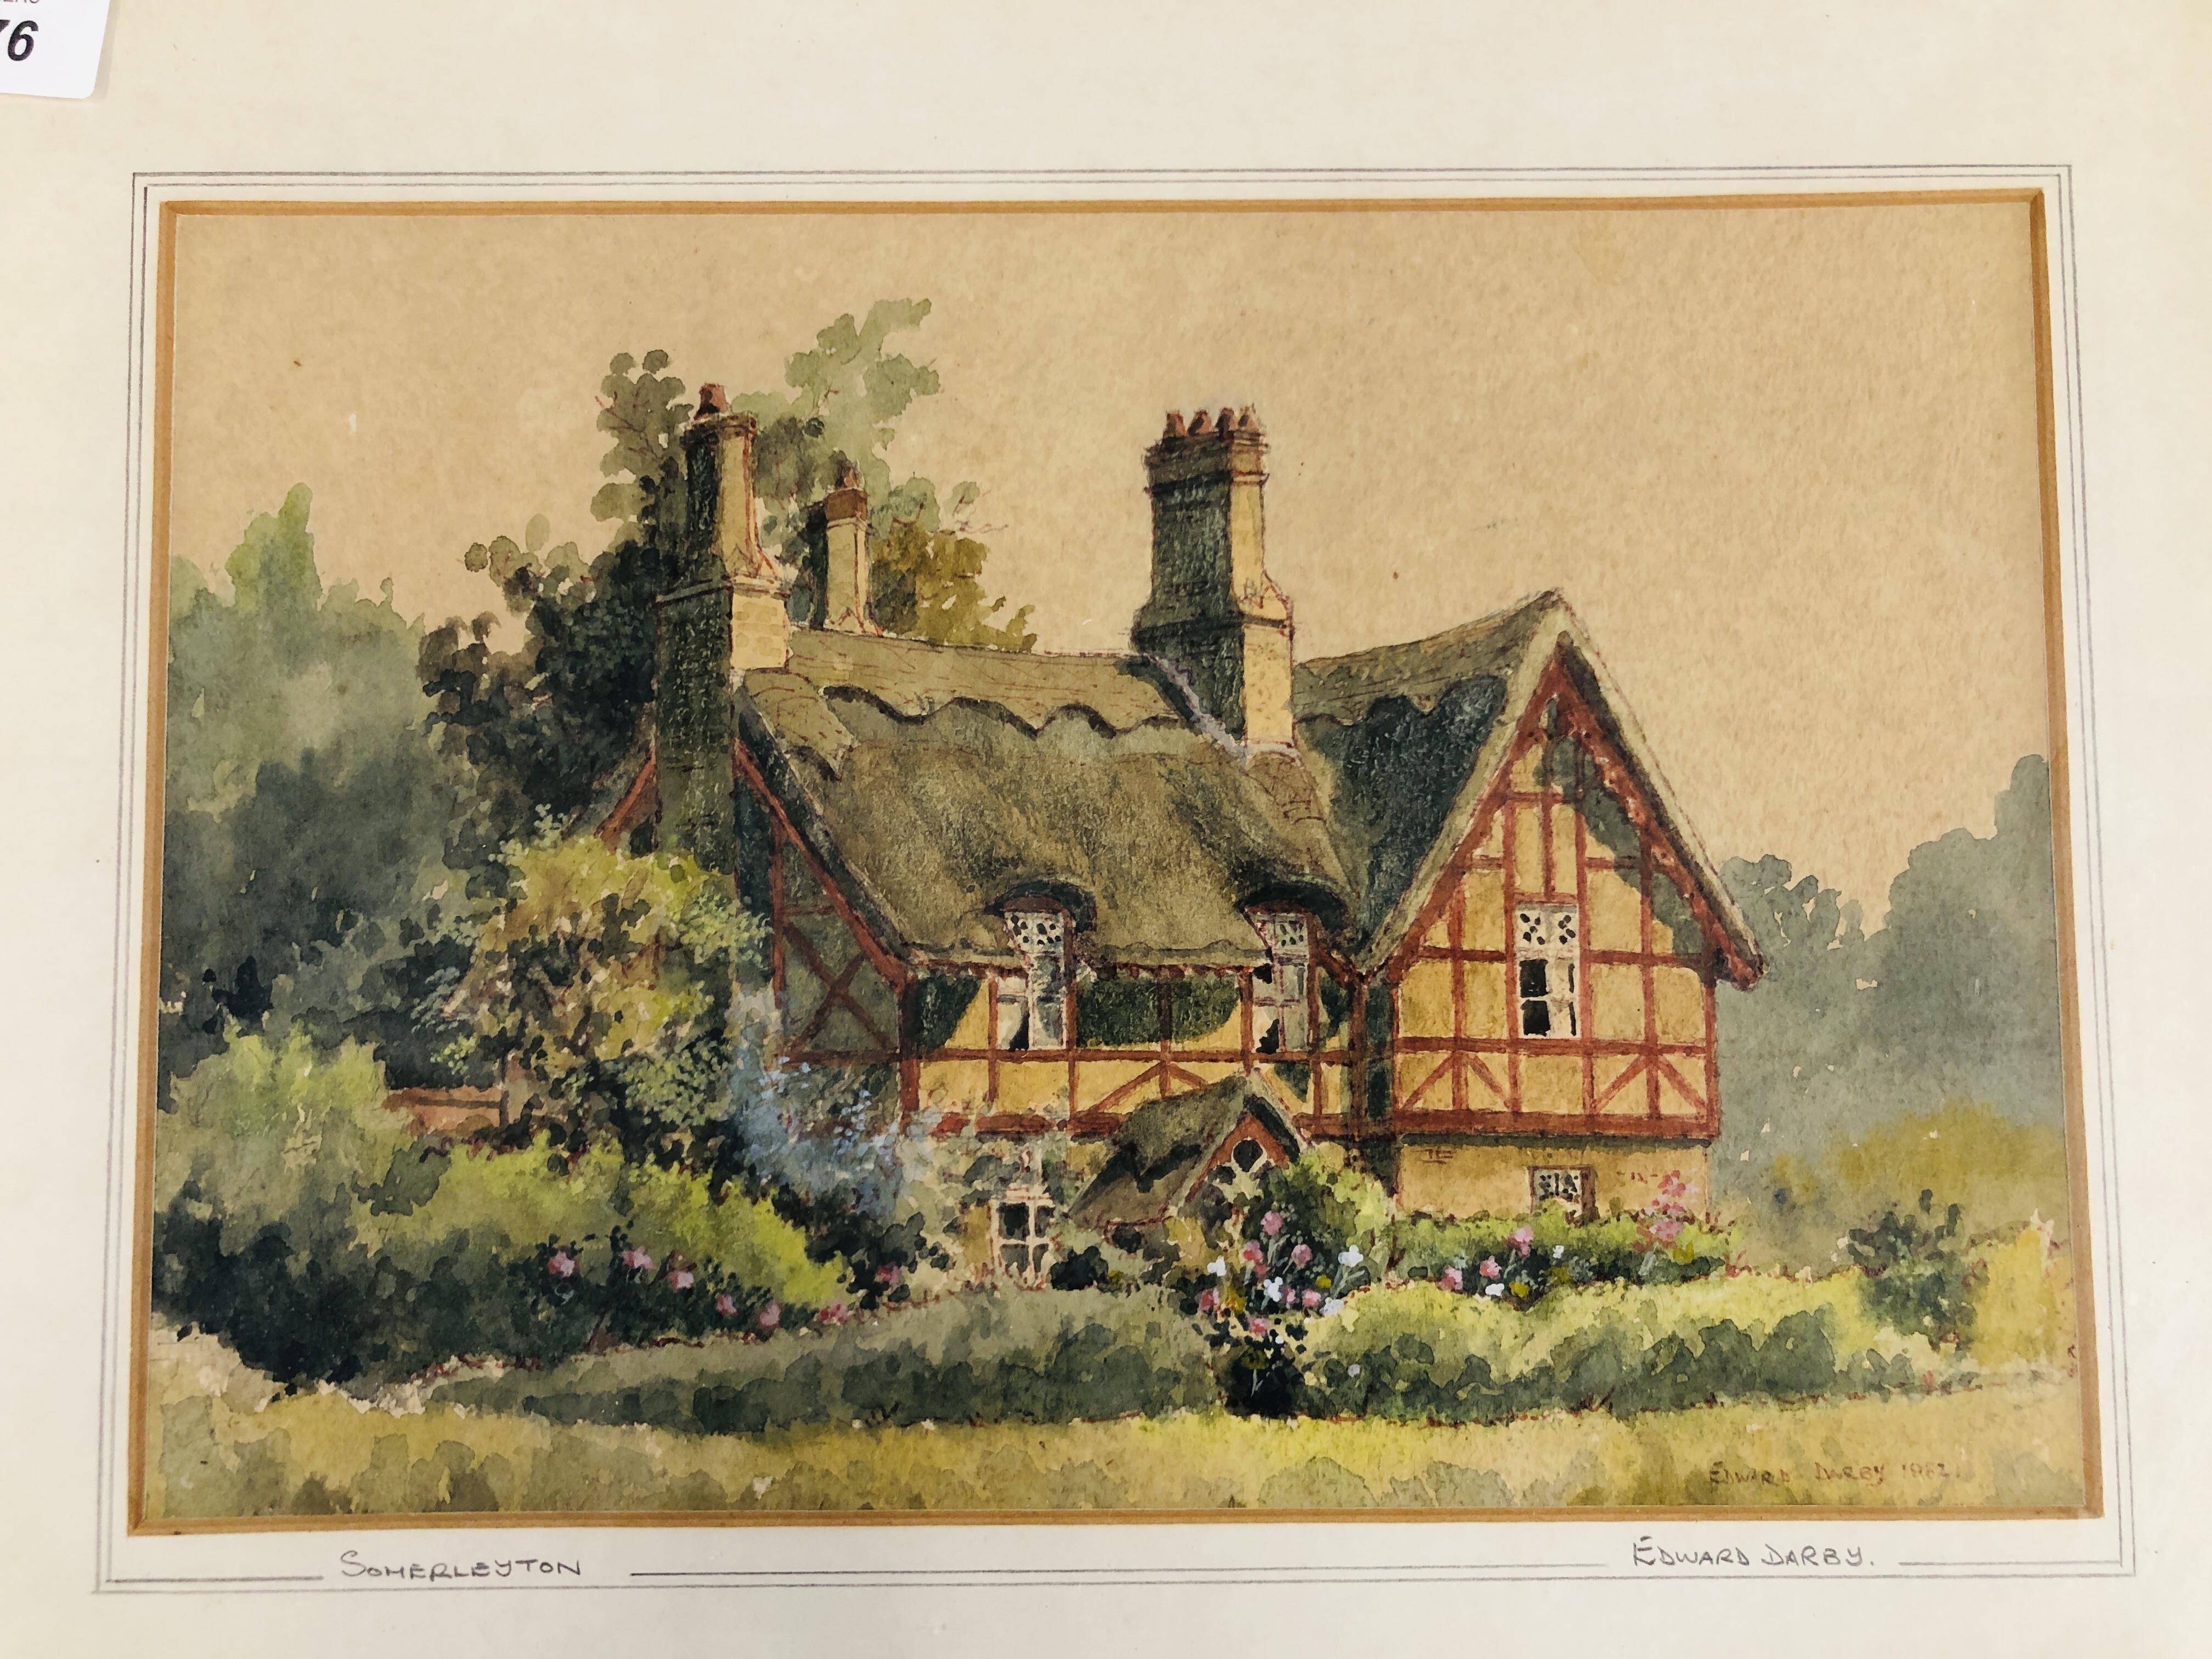 A FRAMED AND MOUNTED WATERCOLOUR OF "SOMERLEYTON" BEARING SIGNATURE EDWARD DARBY 1982. - Image 2 of 5